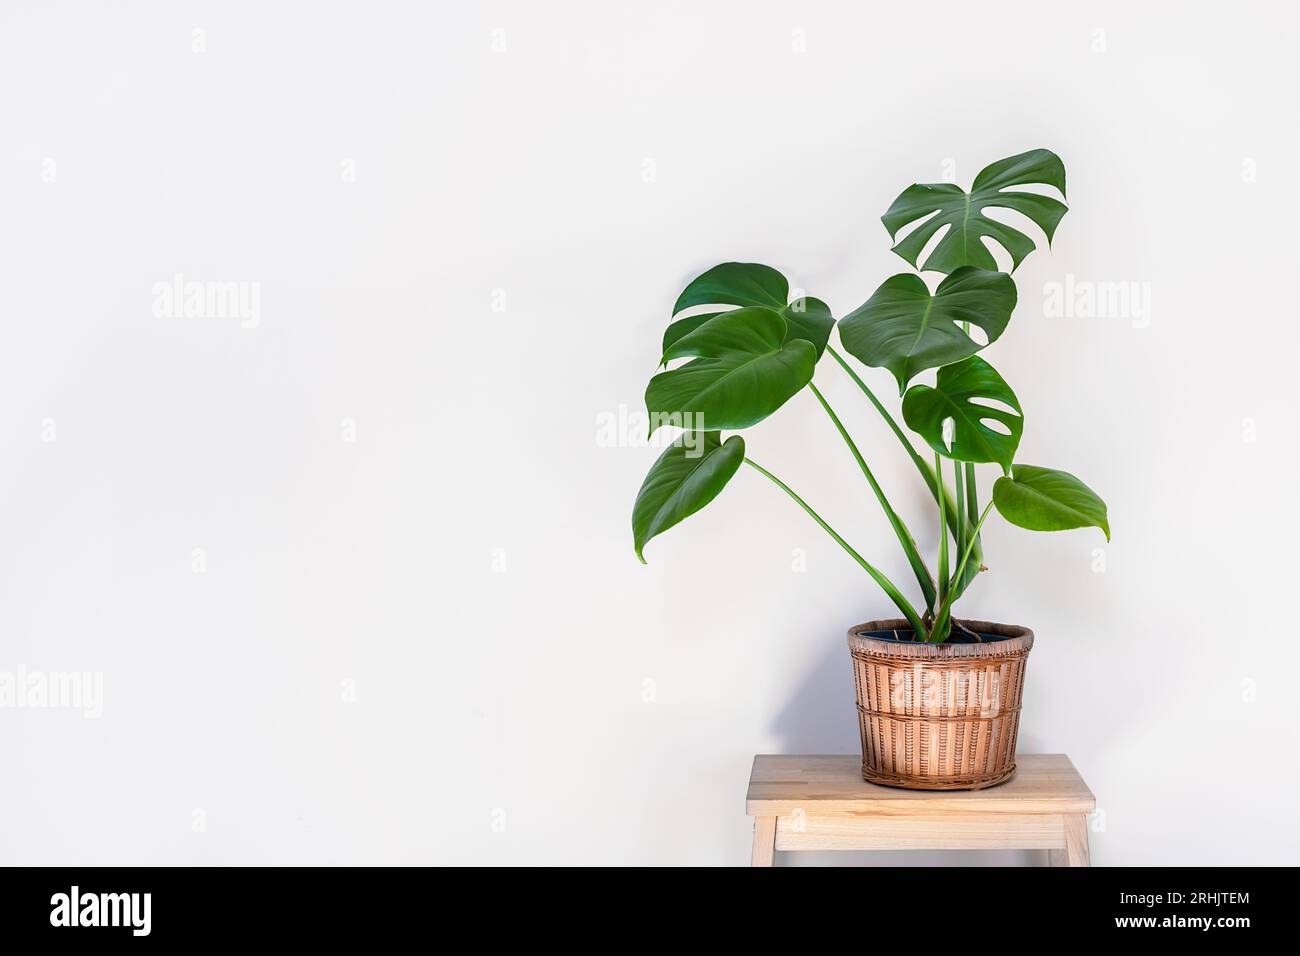 Monstera deliciosa or Swiss Cheese Plant in wicker flower pot isolated on a light background, home gardening and connecting with nature Stock Photo